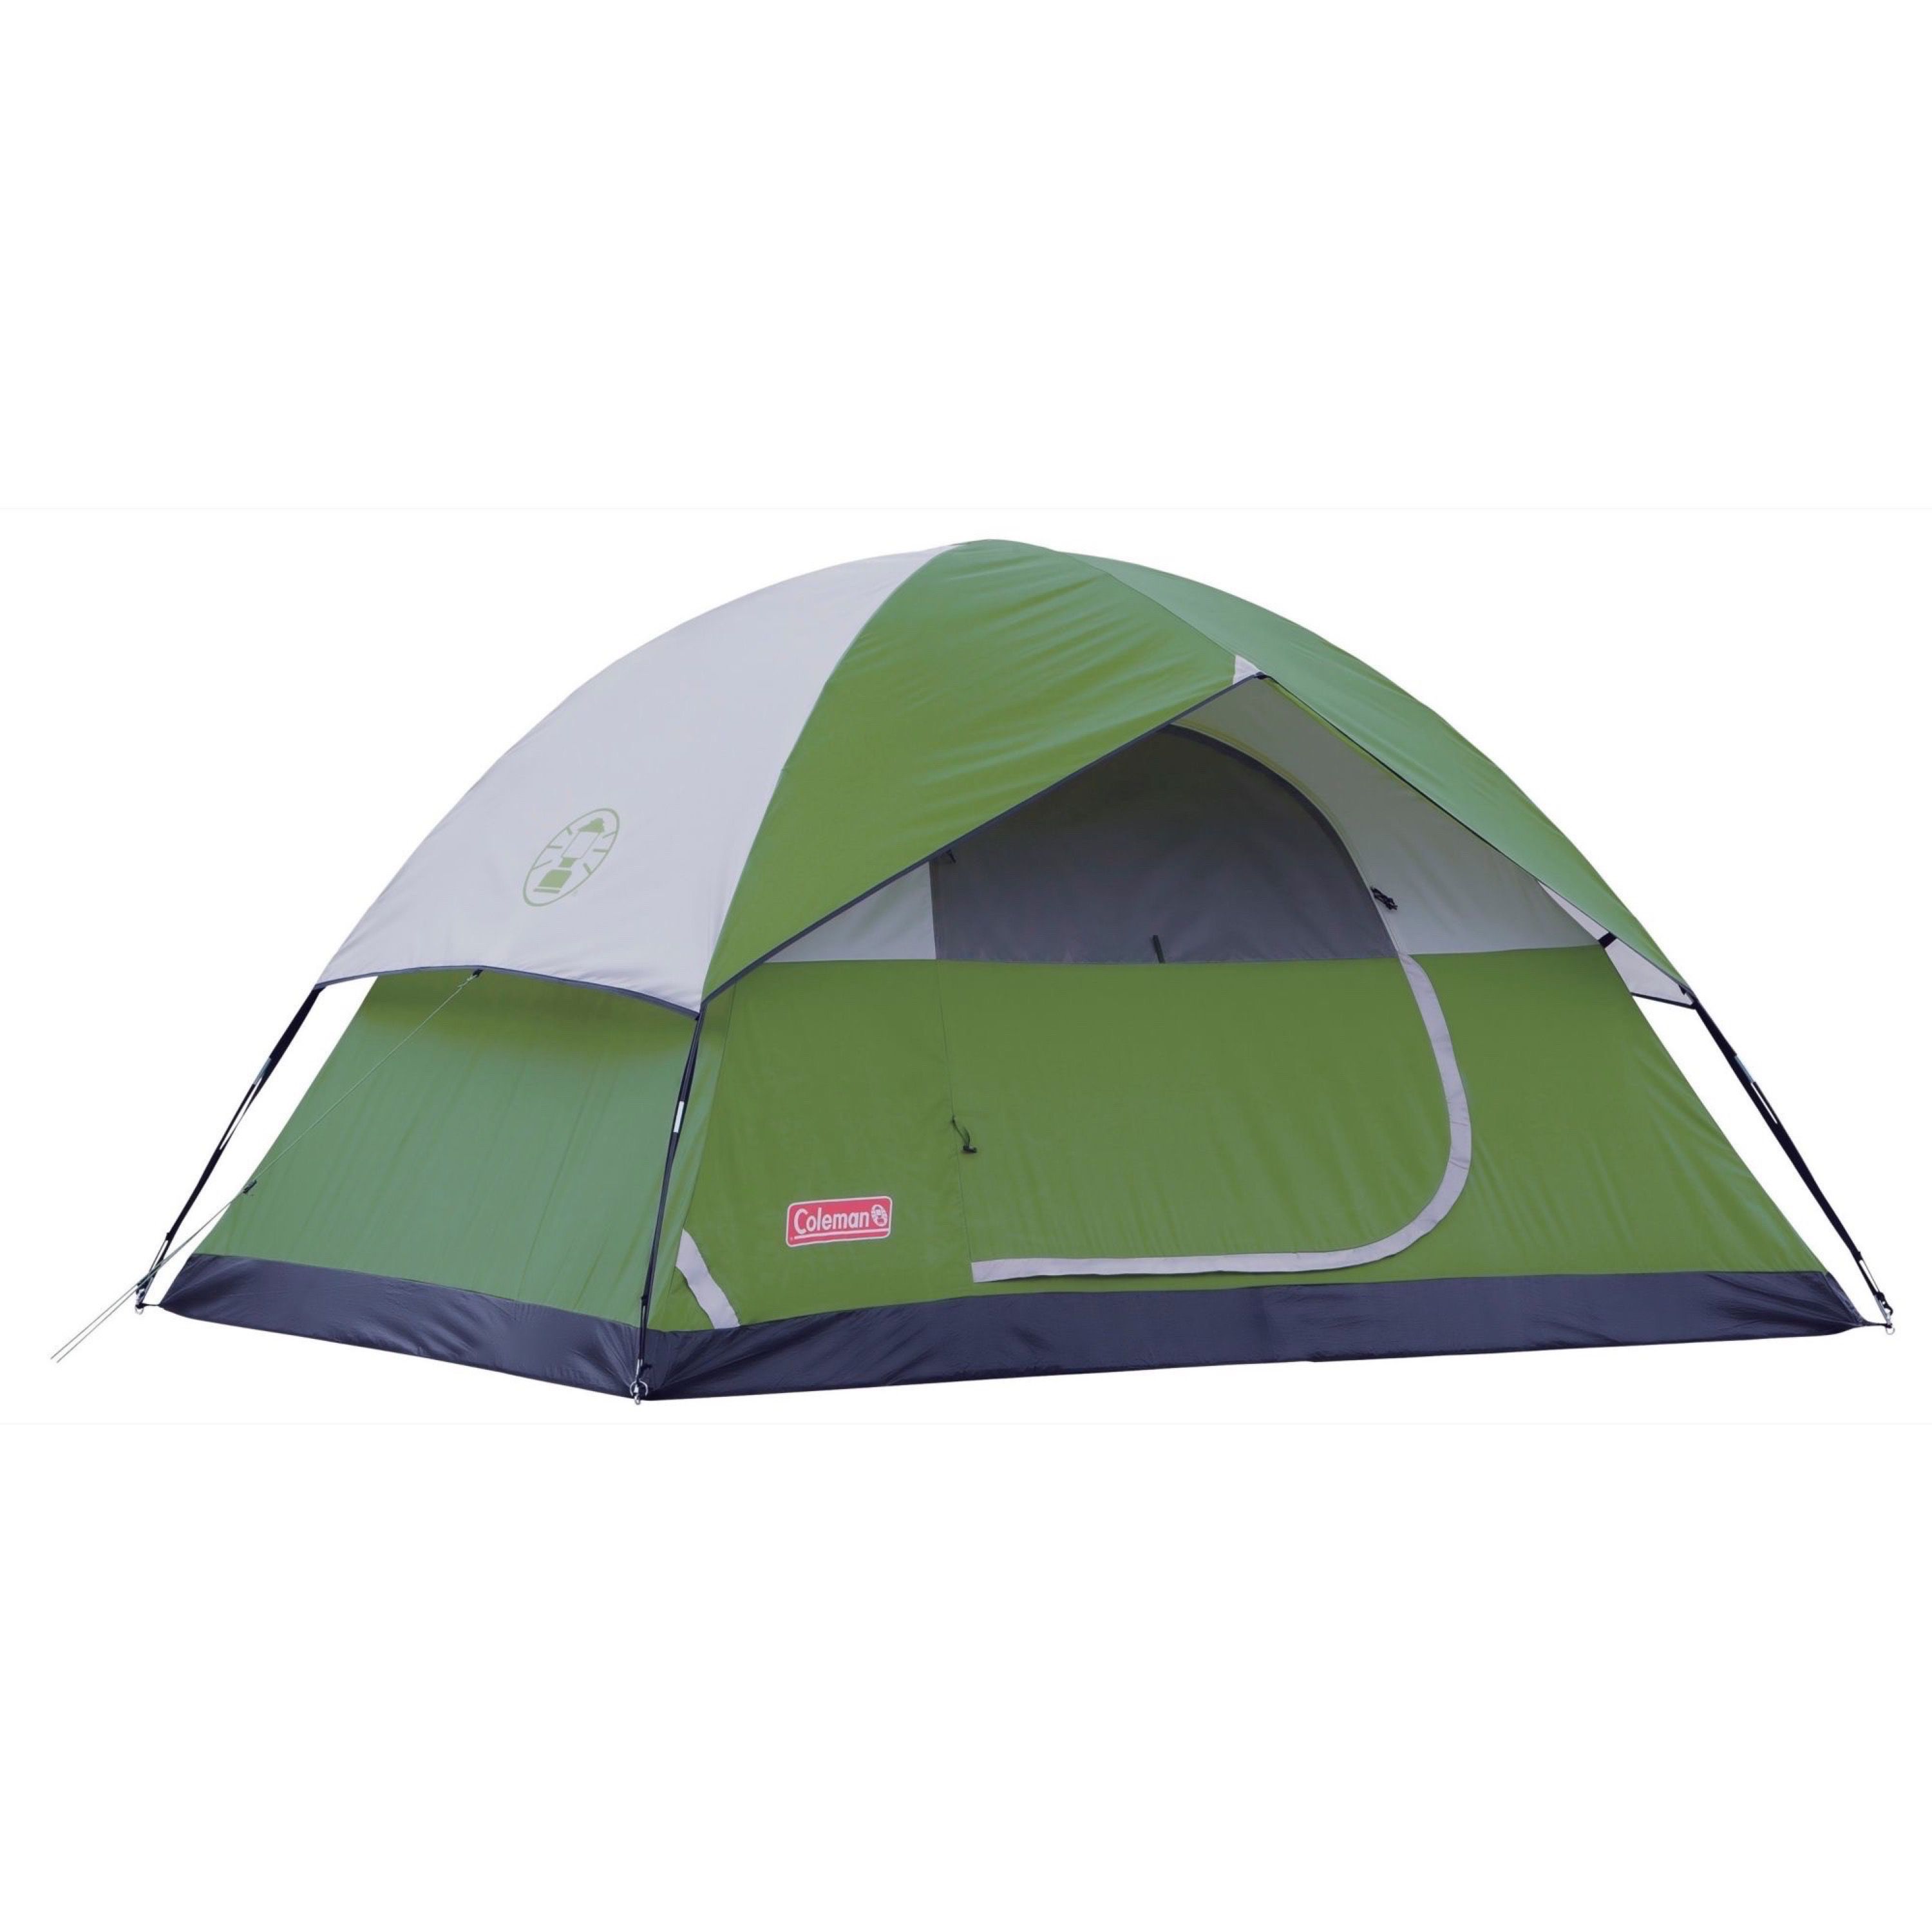 Coleman 3-Person Dome Tent - image 1 of 7